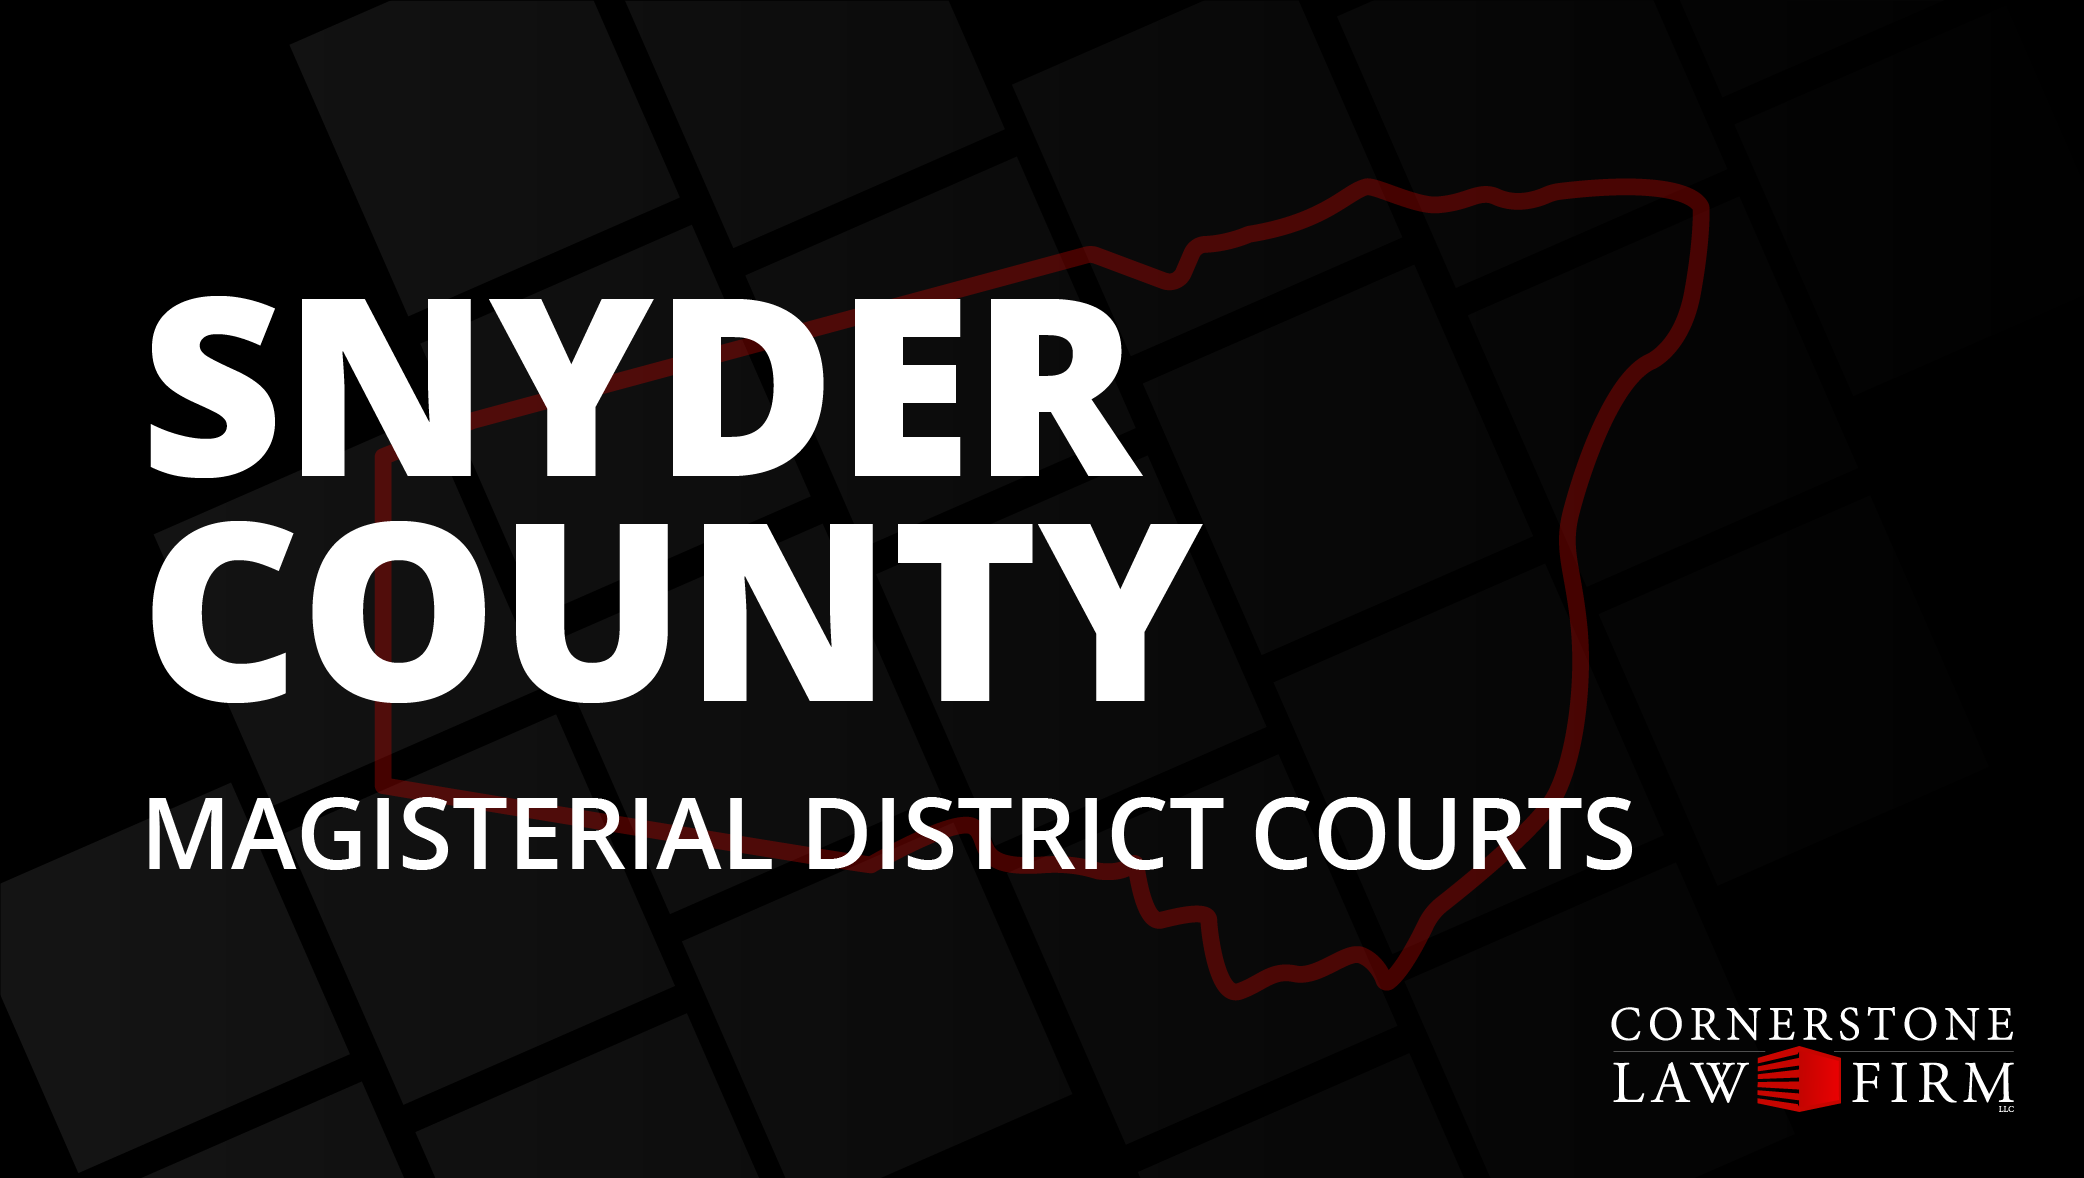 The words "Snyder County Magisterial District Courts" over a black background with a faded red outline of the county.